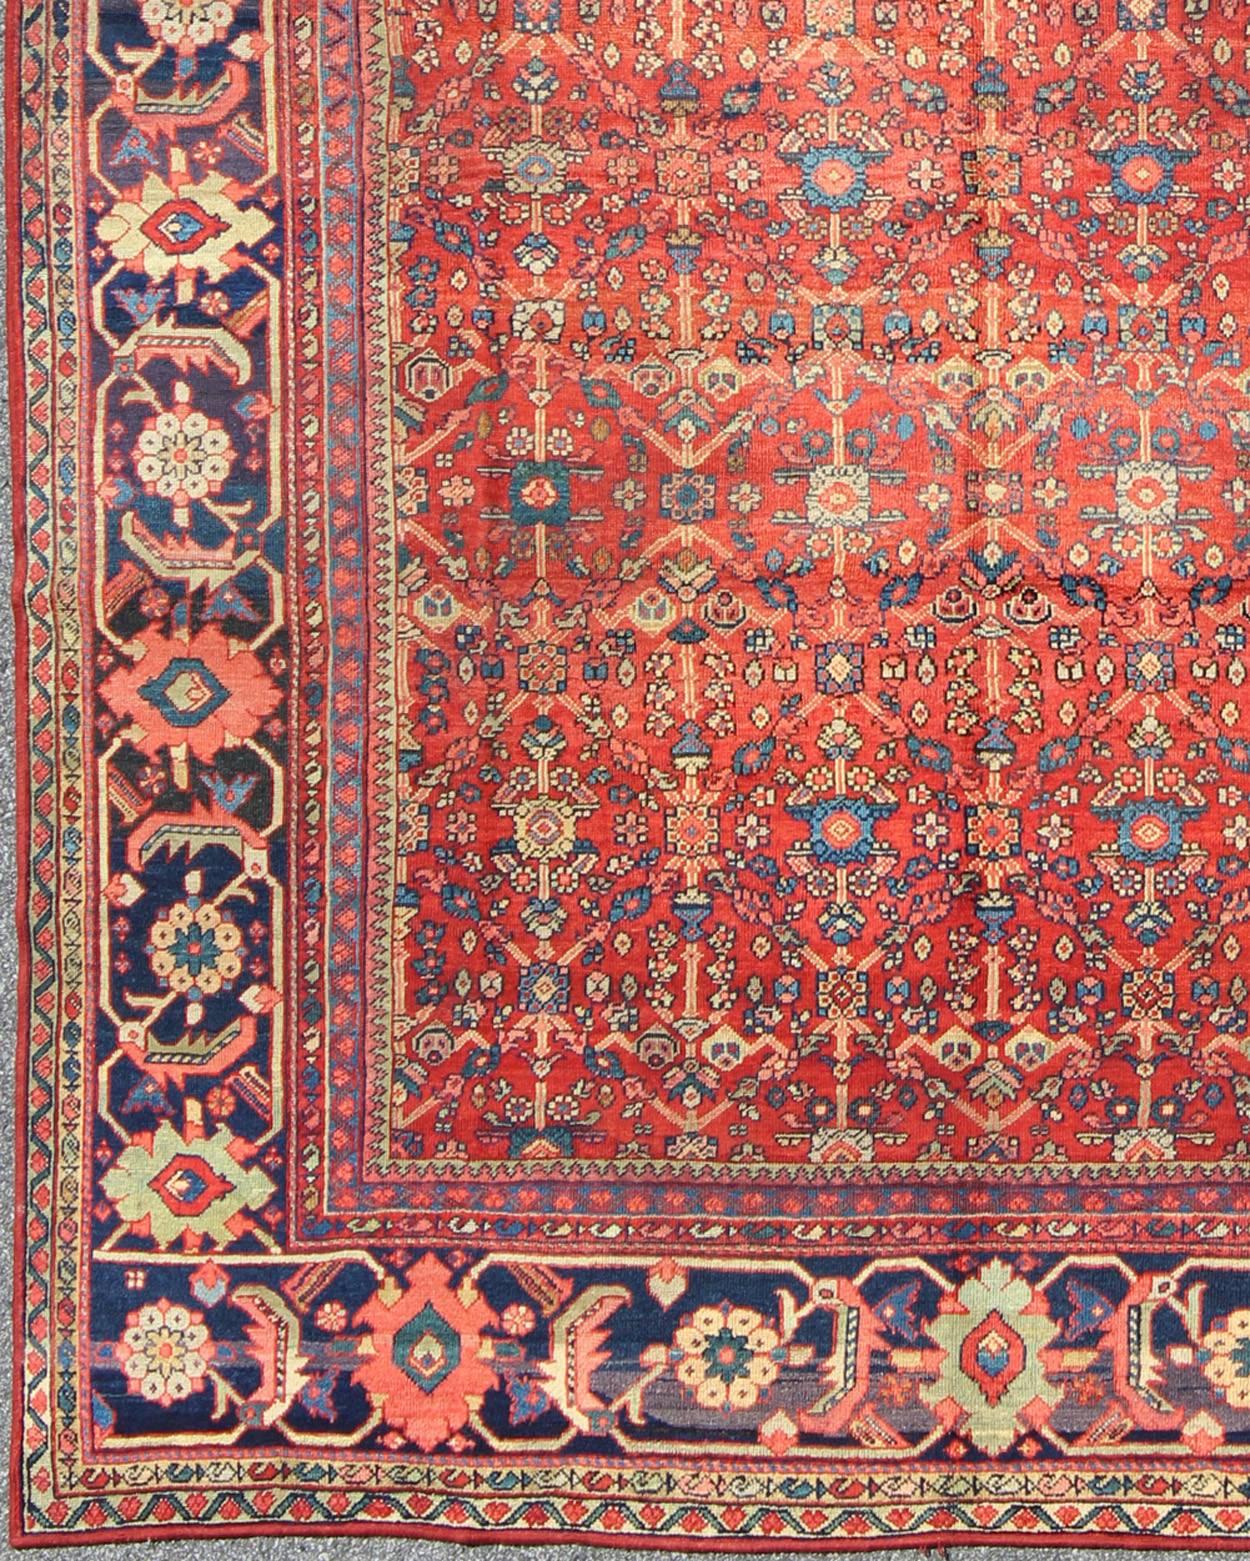 Antique Sultanabad rug with all over Sub Geometric design, Keivan Woven Arts/ rug /S12-0702, country of origin / type: Persian / Sultanabad, circa early-20th Century.  Antique Sultanabad

Measures: 8'5 x 10'10.

This inspiring Sultanabad from the